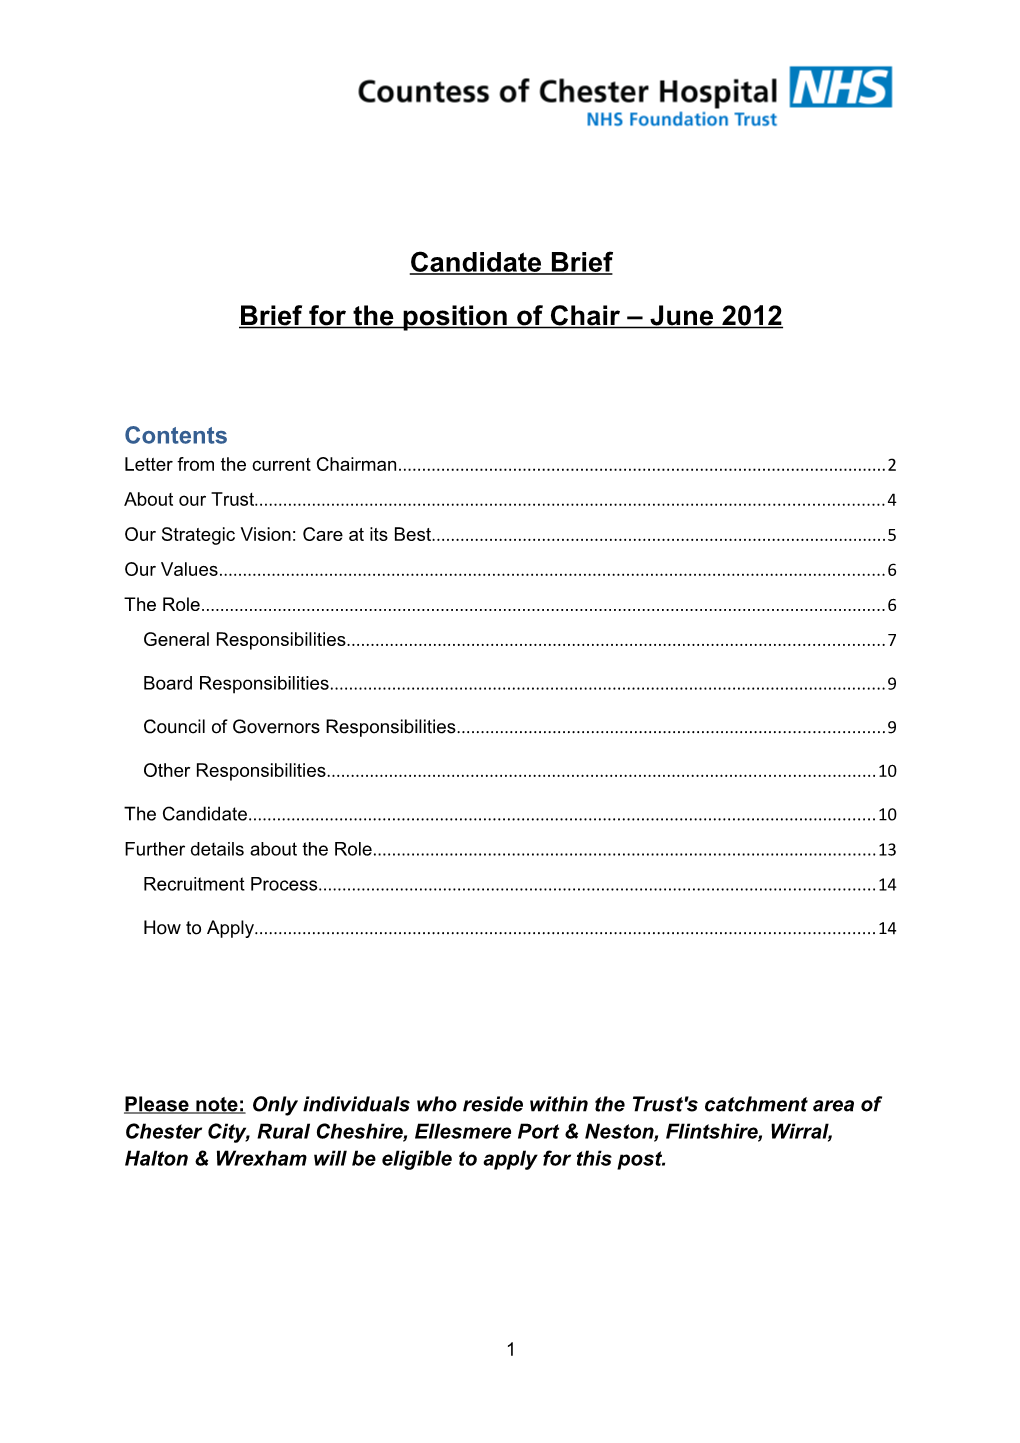 Brief for the Position of Chair June 2012